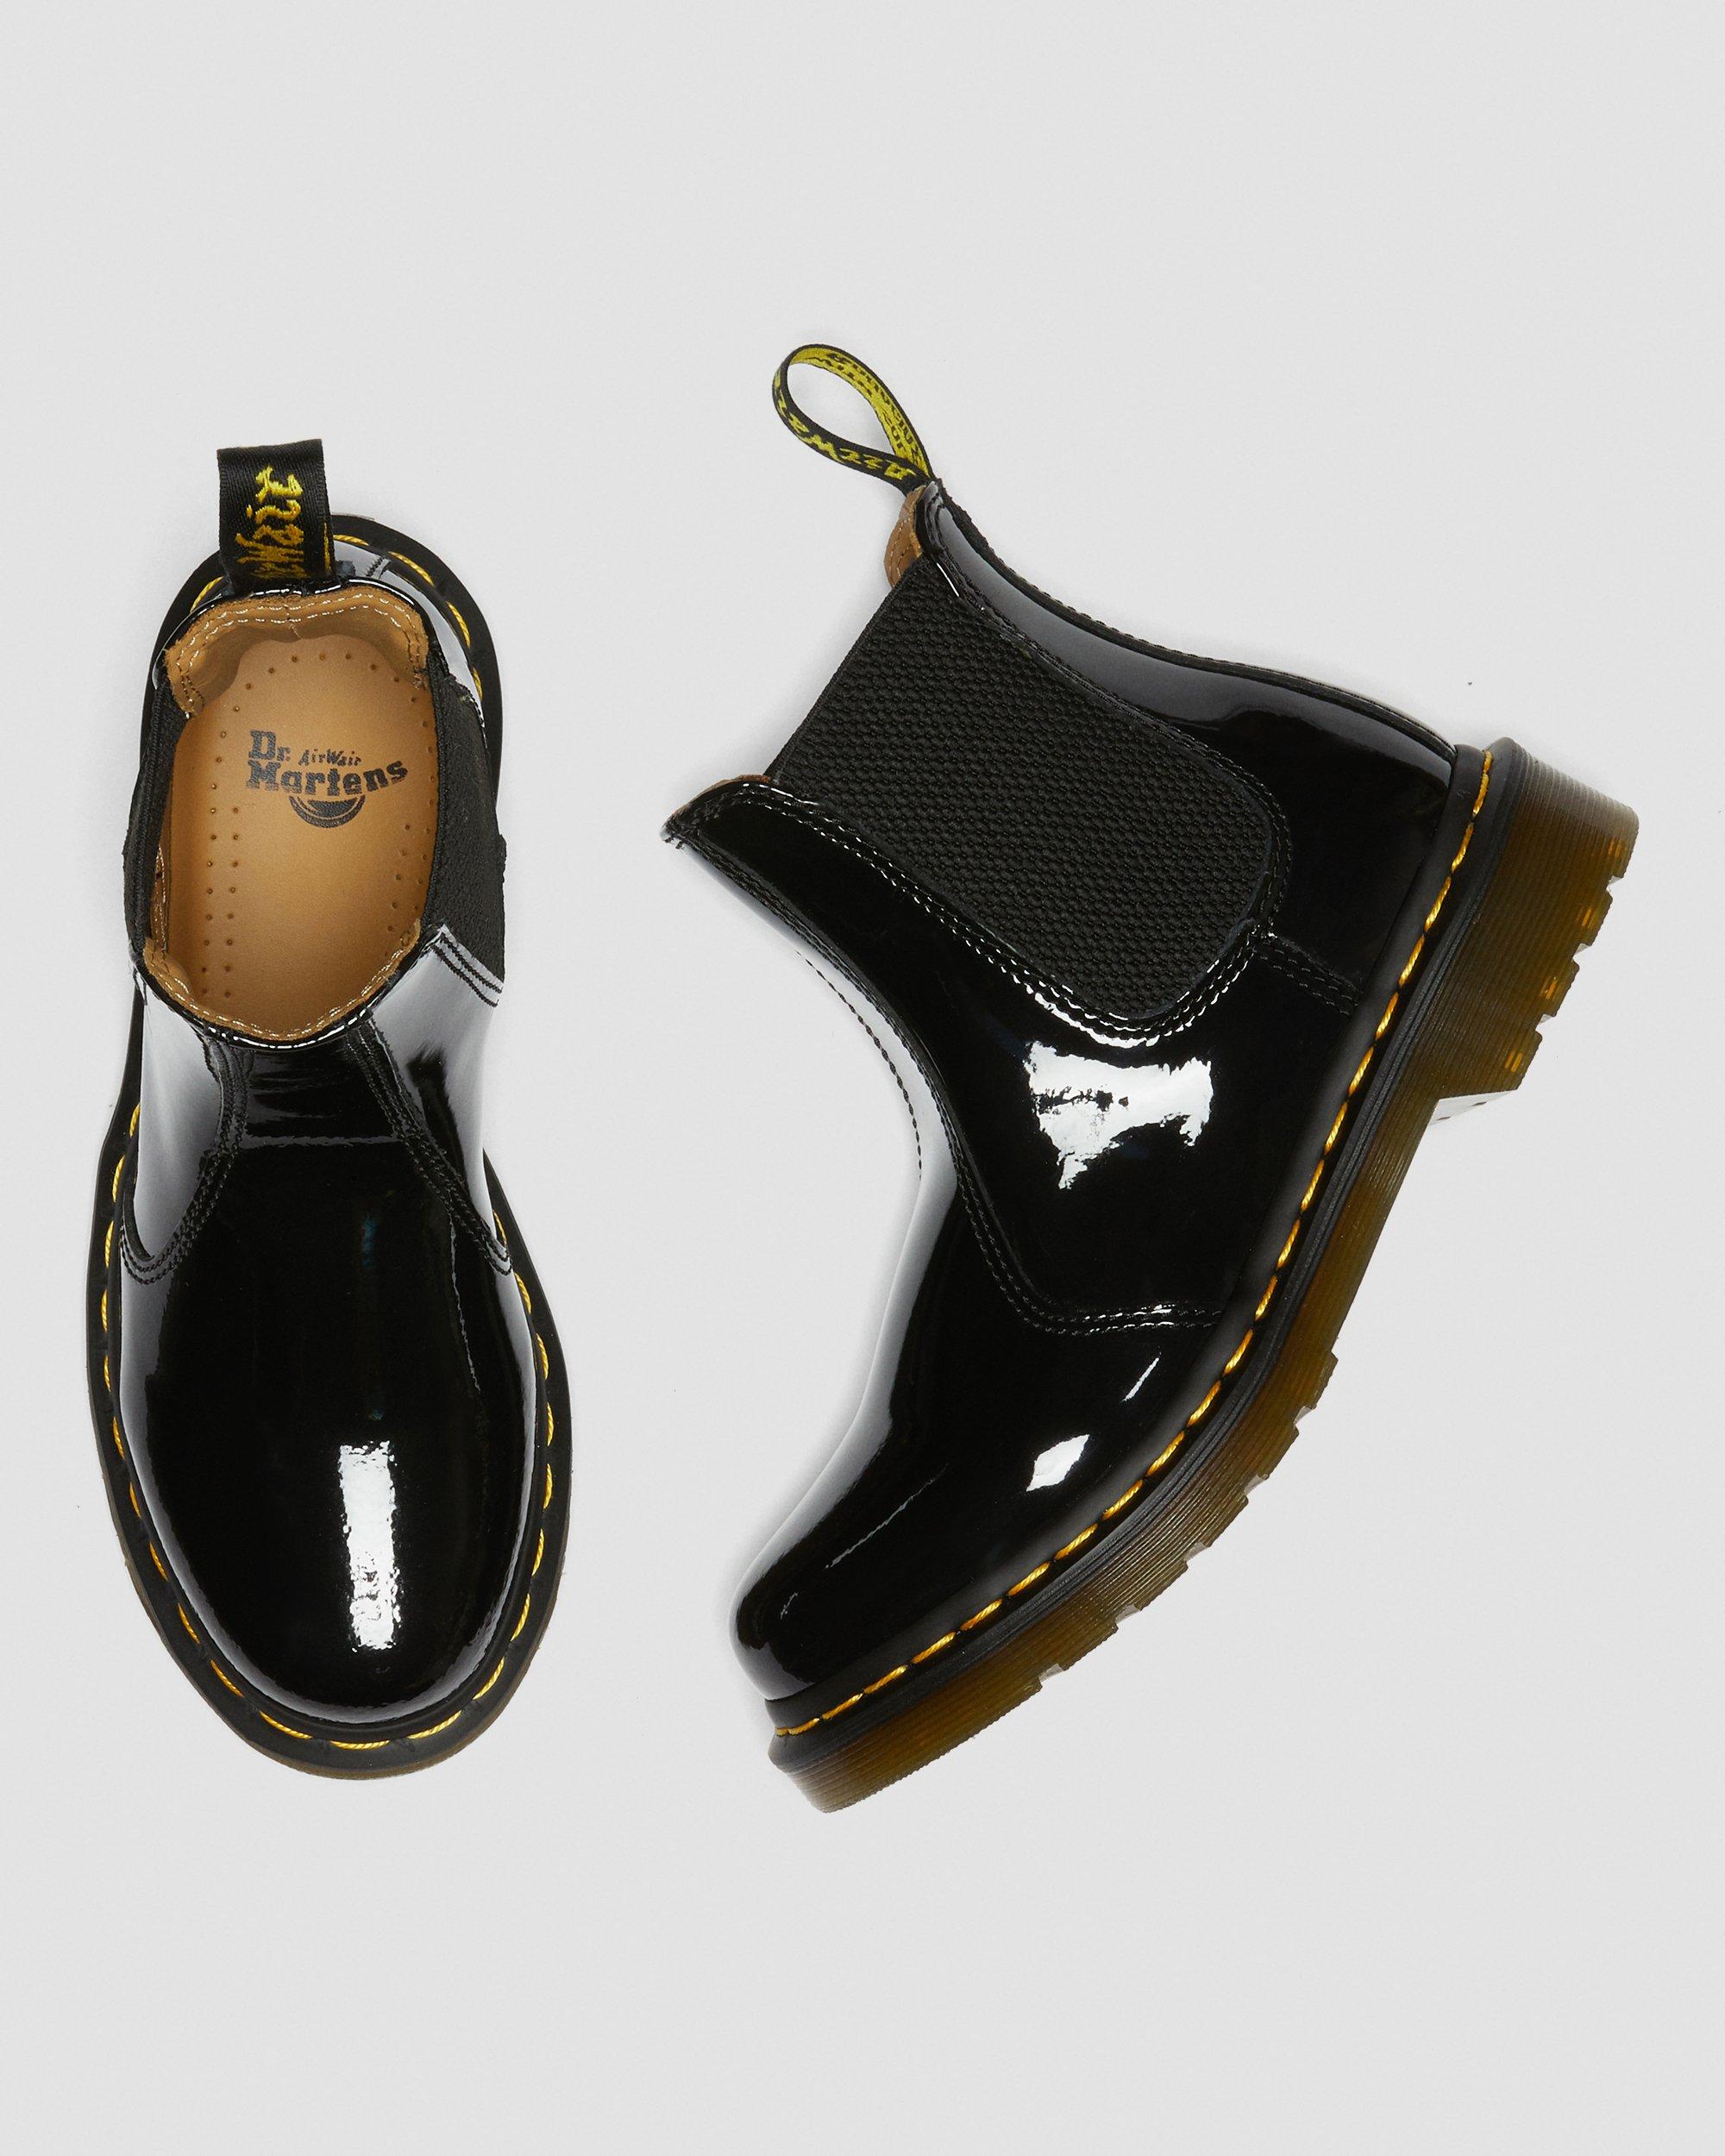 2976 Women's Patent Leather Chelsea Boots in Black | Dr. Martens